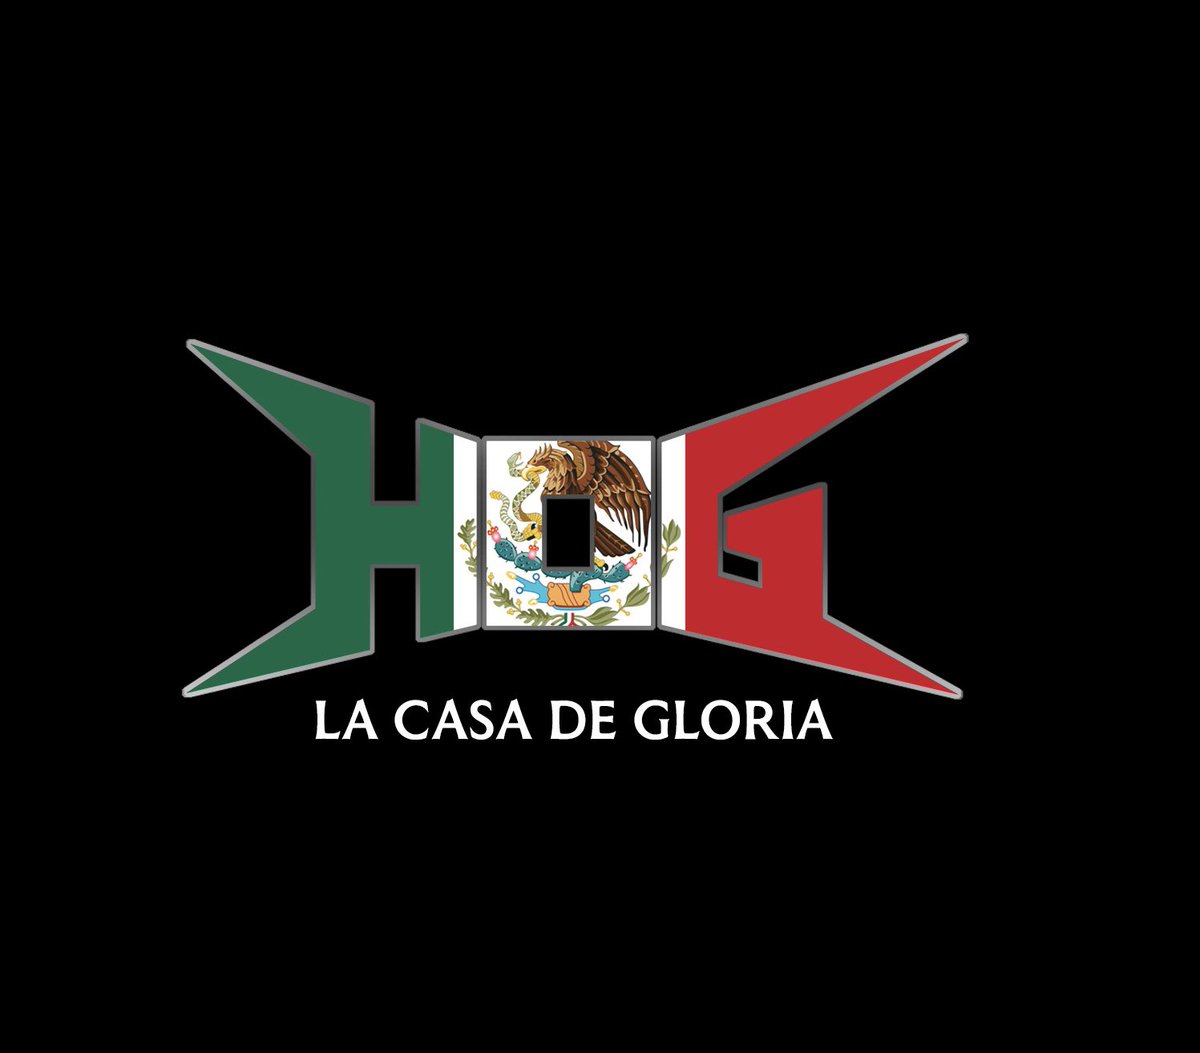 🇲🇽🇲🇽🇲🇽 HOG (La Casa de Gloria) presents #CincoDeMayo Sunday, May 5th. Stay tuned TONIGHT for the first talent announcement!!! Tickets go on sale TOMORROW 12 noon